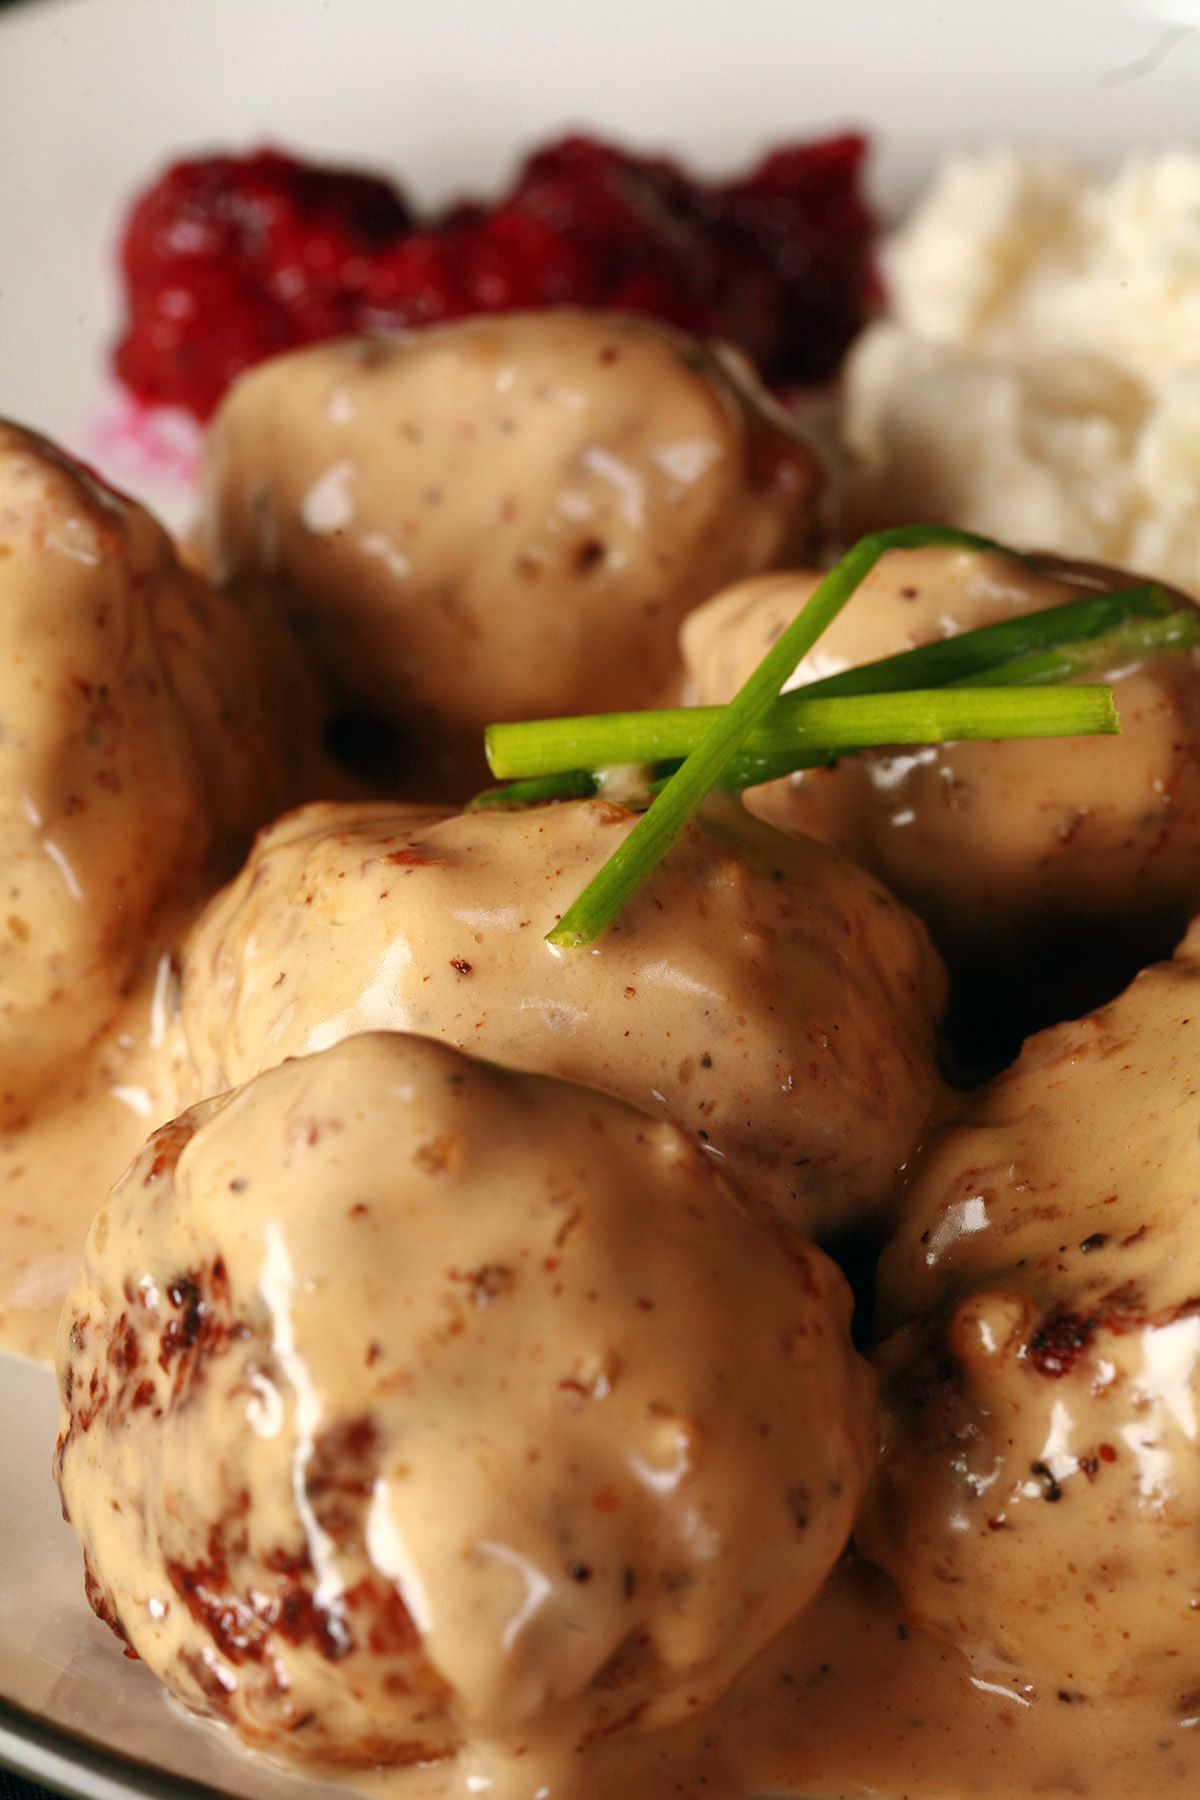 A plate of low carb Swedish meatballs with lingonberry sauce.